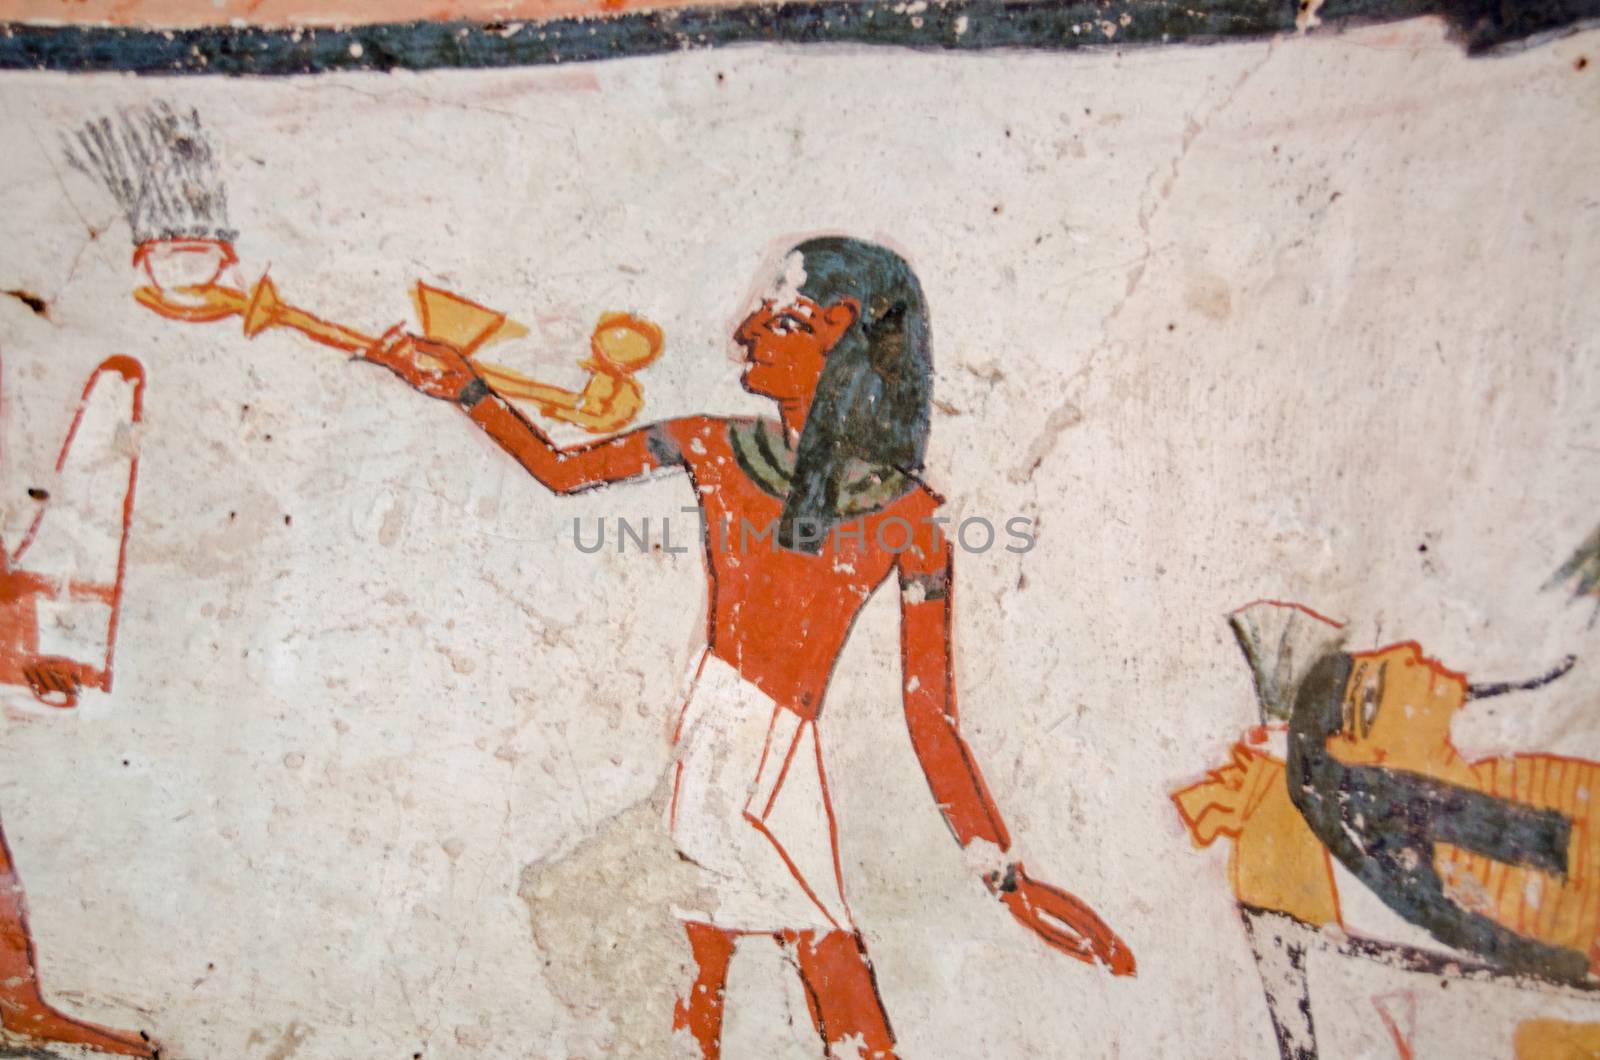 Ancient Egyptian mural showing a priest carrying an incense burner over a mummy.  Ancient Egyptian tomb of Amenemonet on the West Bank of the Nile at Luxor, Egypt.  Historic painting, thousands of years old.